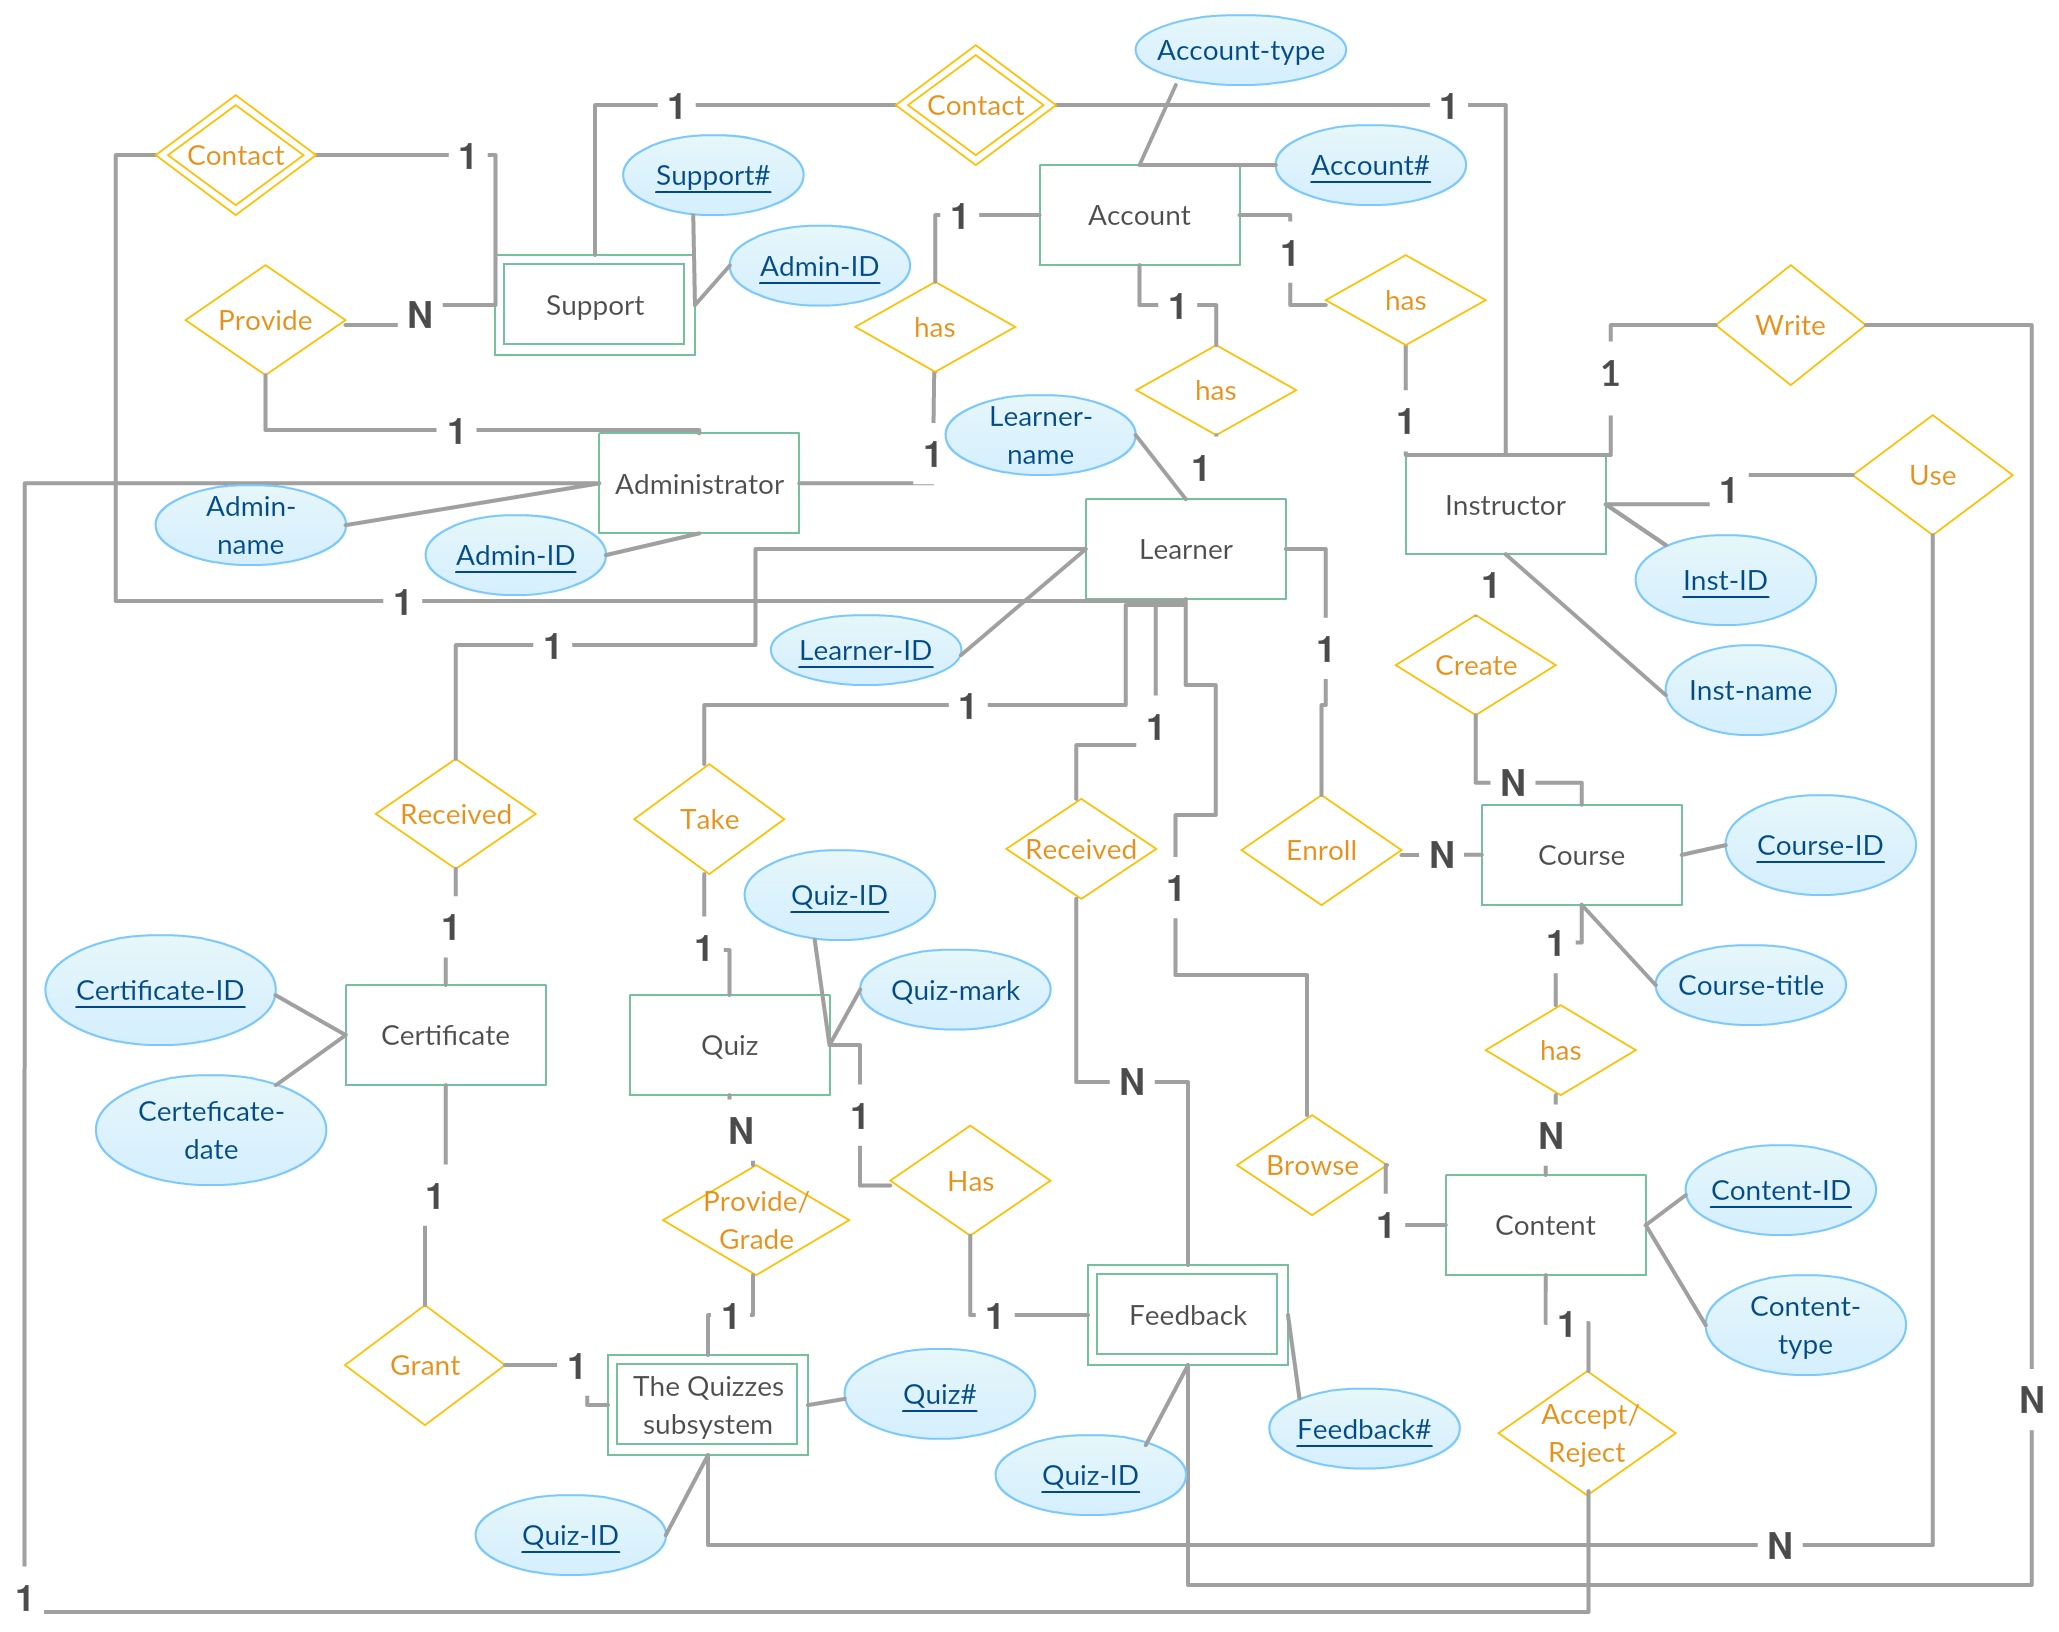 Entity Relationship Diagram (Er Diagram) Of E-Learning pertaining to Er Diagram Jewellery Shop